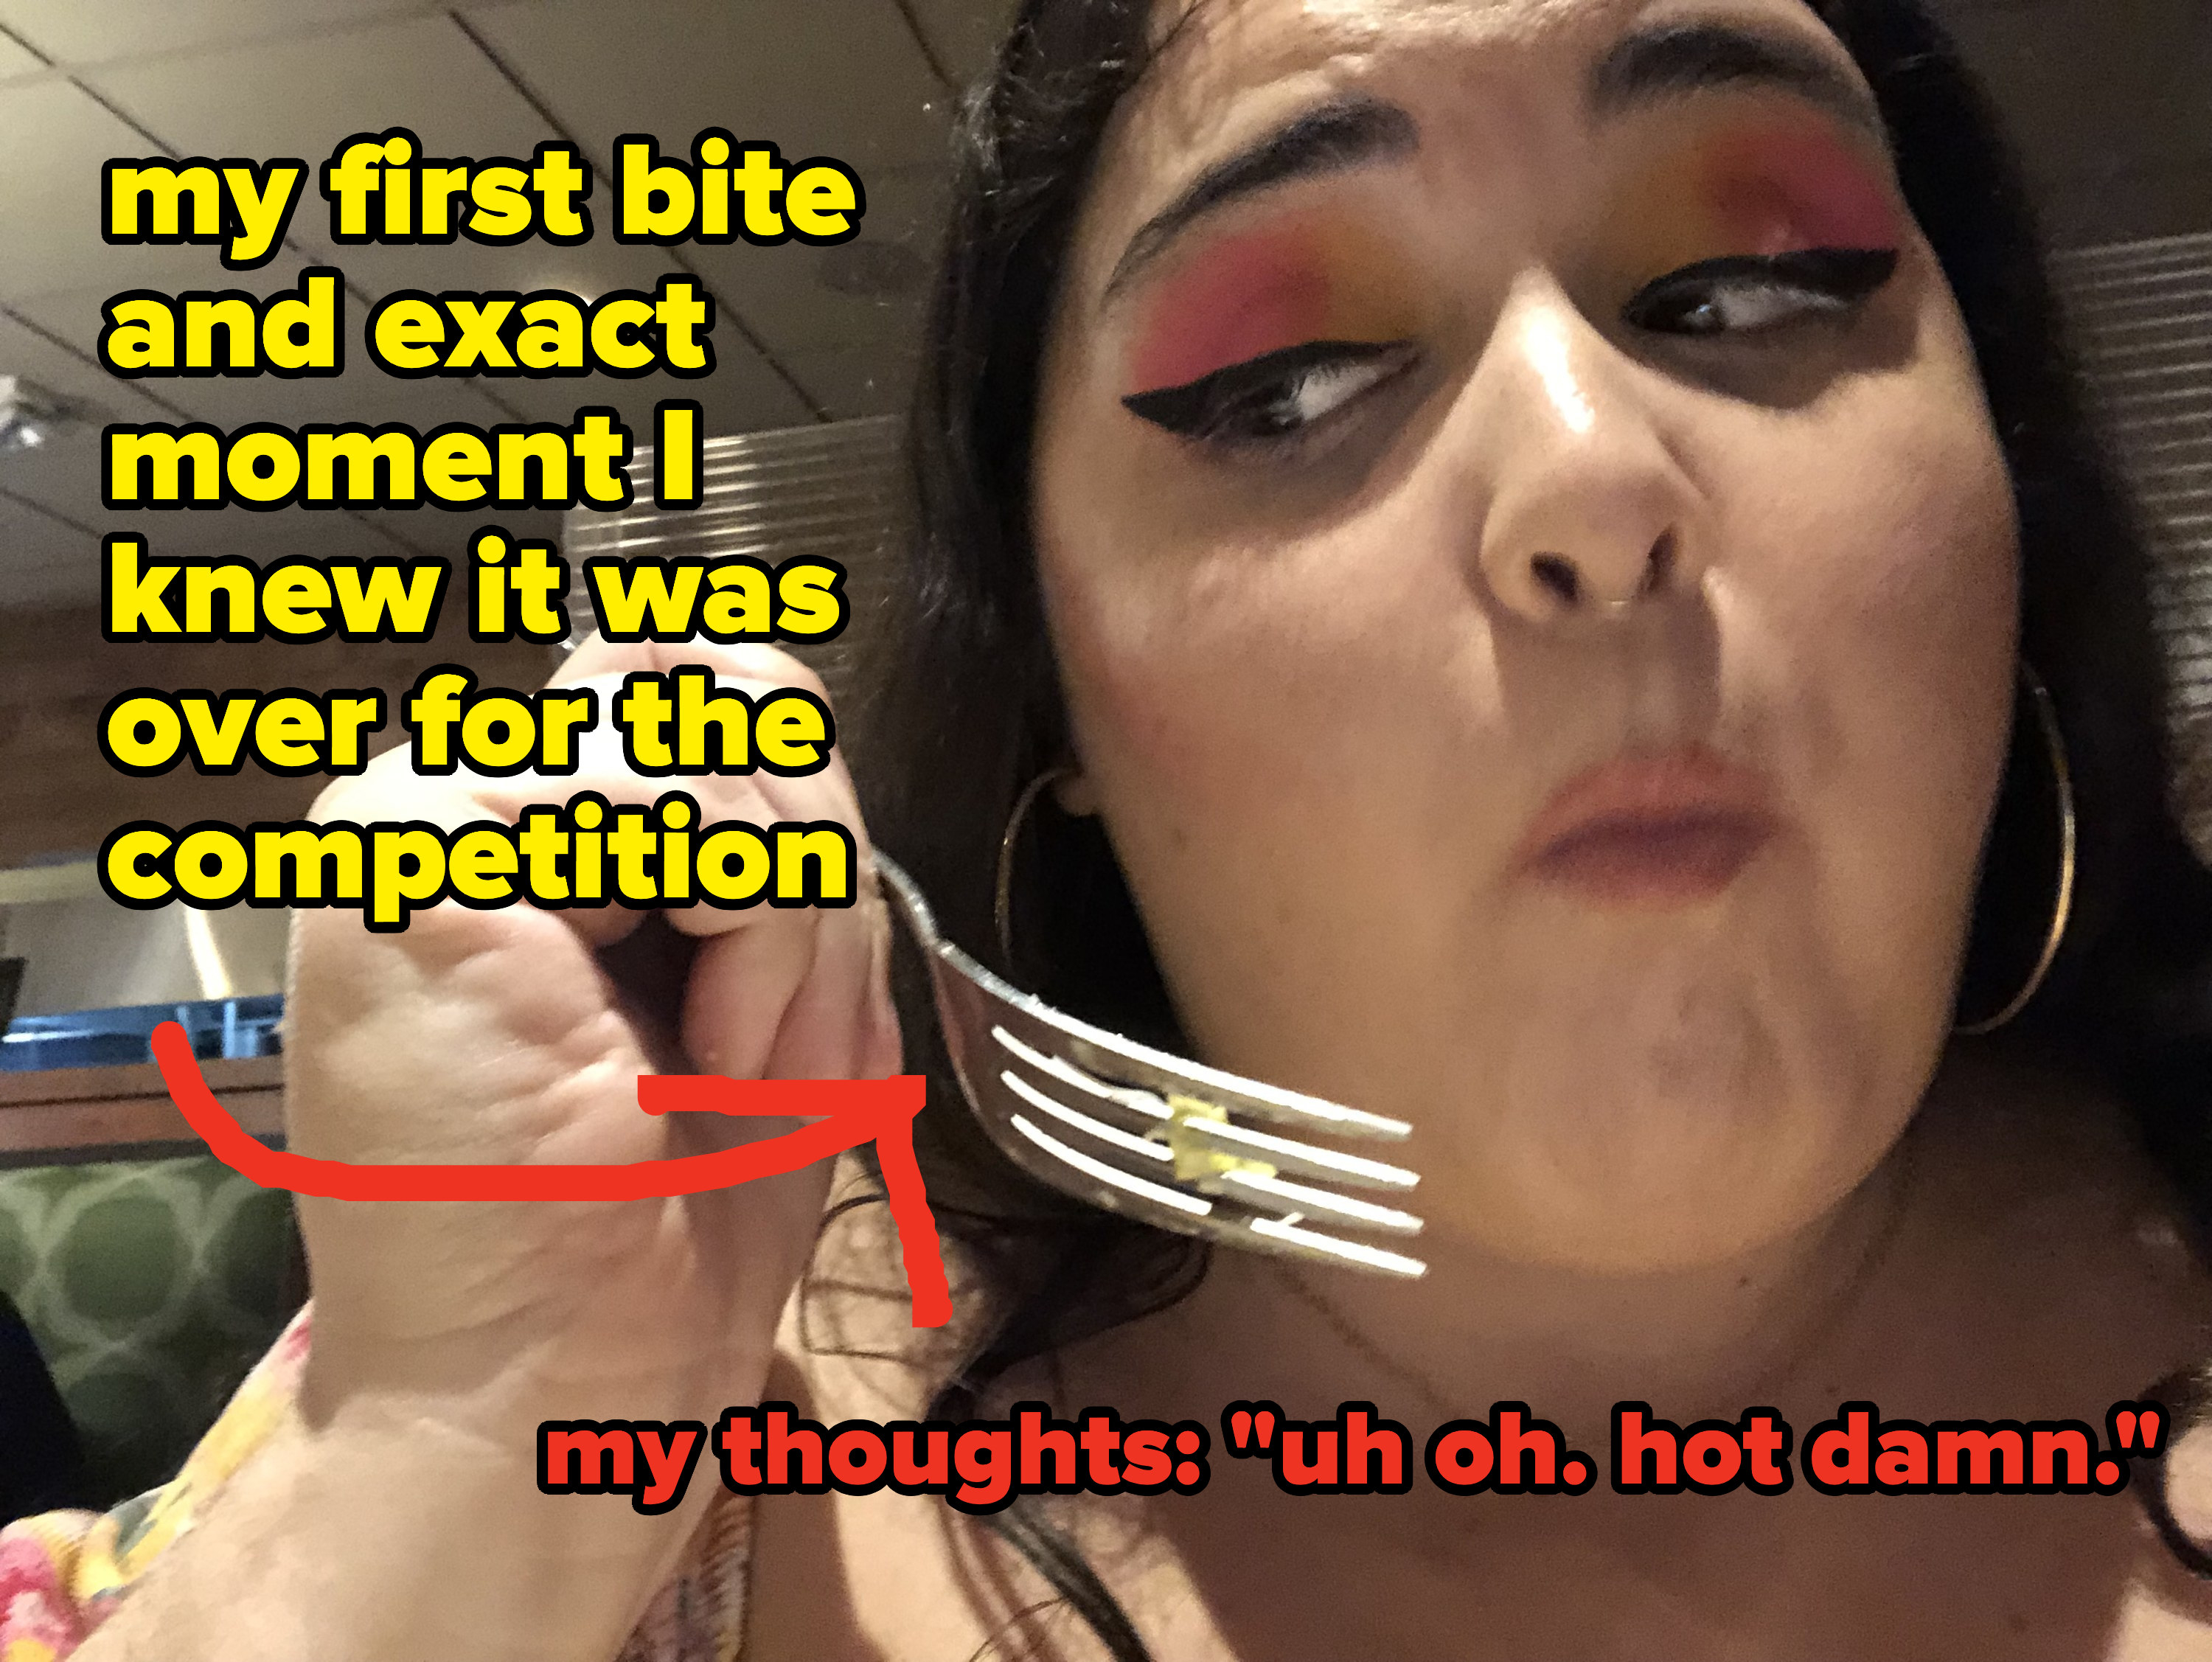 woman holding fork with text that says &quot;my first bite and exact moment I knew it was over for the competition&quot; and &quot;my thoughts: uh oh. hot damn.&quot;